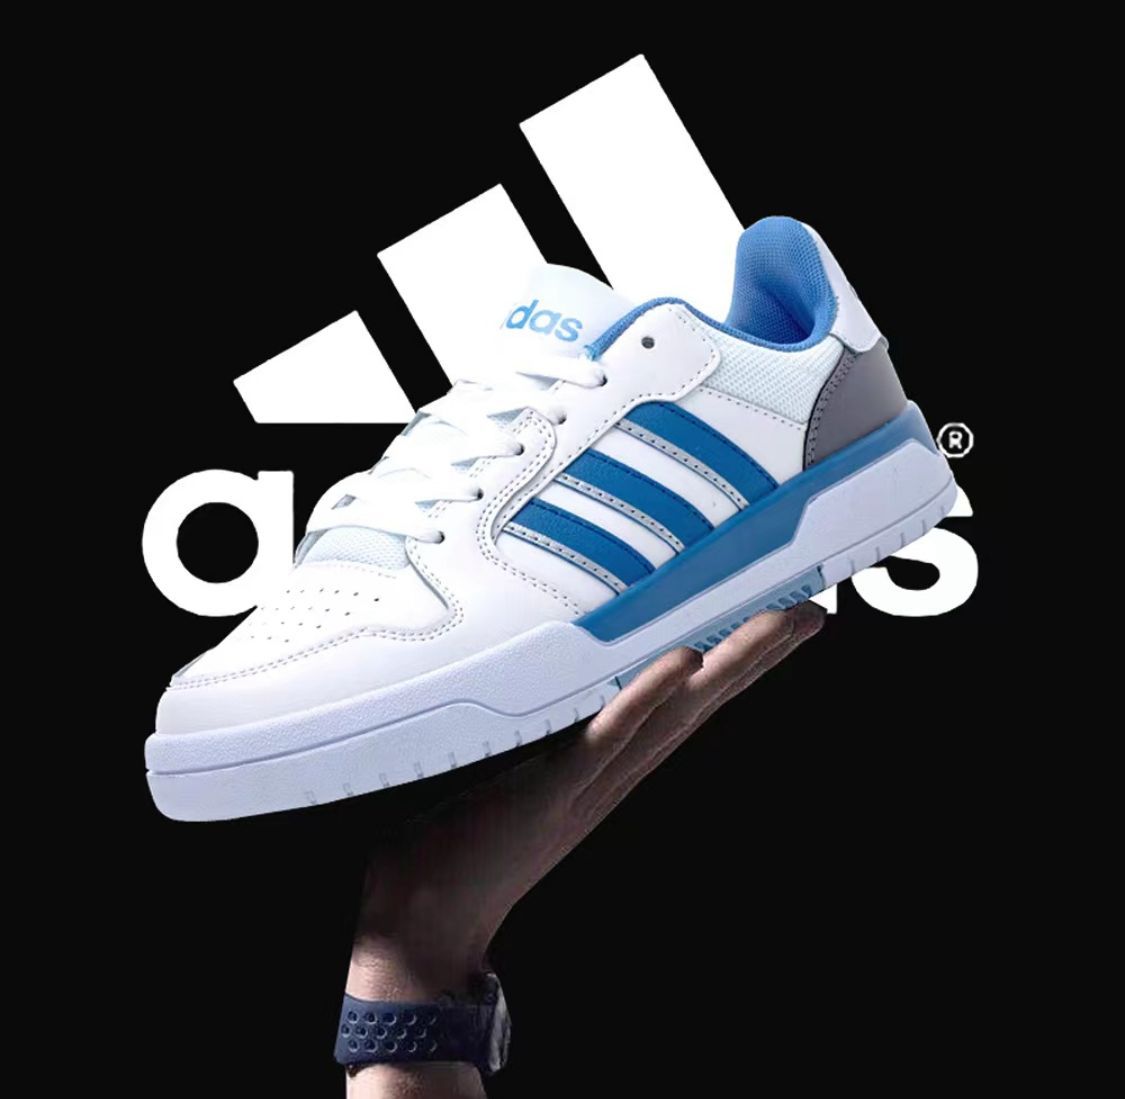 ADIDAS Neo Shoes Skate White Blue Shoes First Copy Shoes